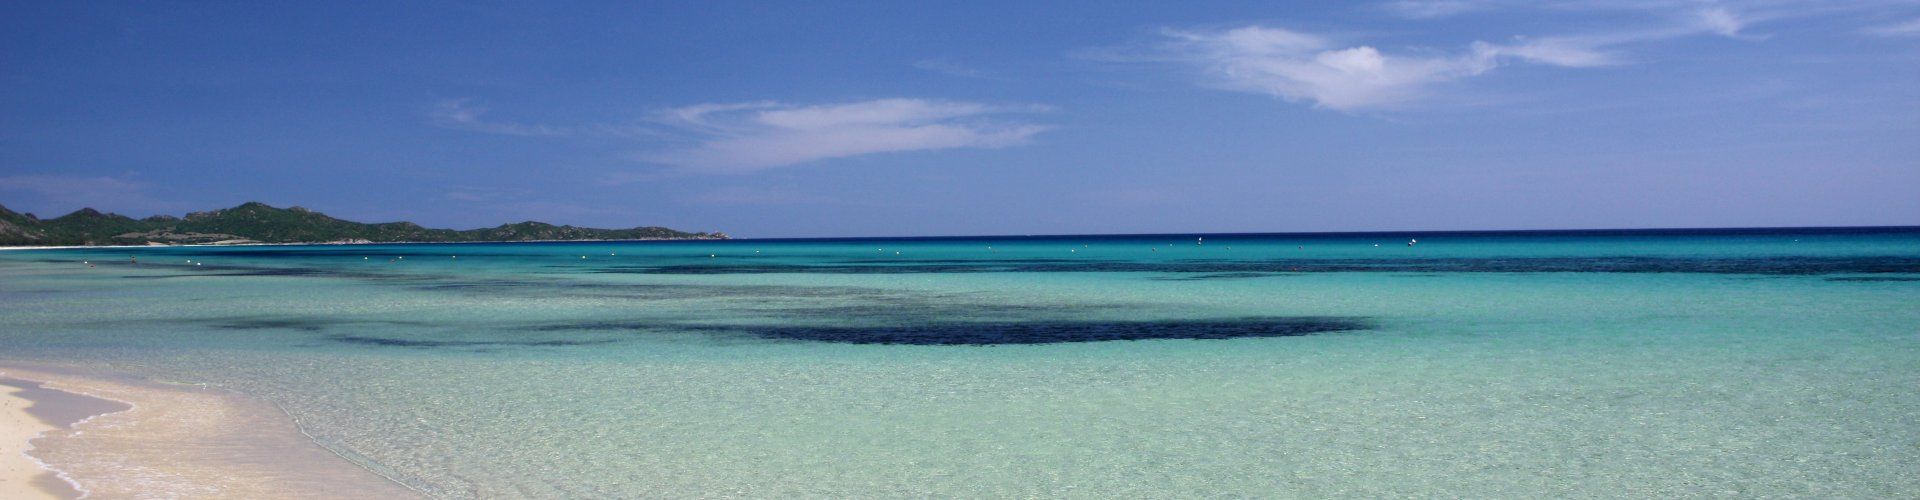 Crystal clear water on the beach of Costa Rei